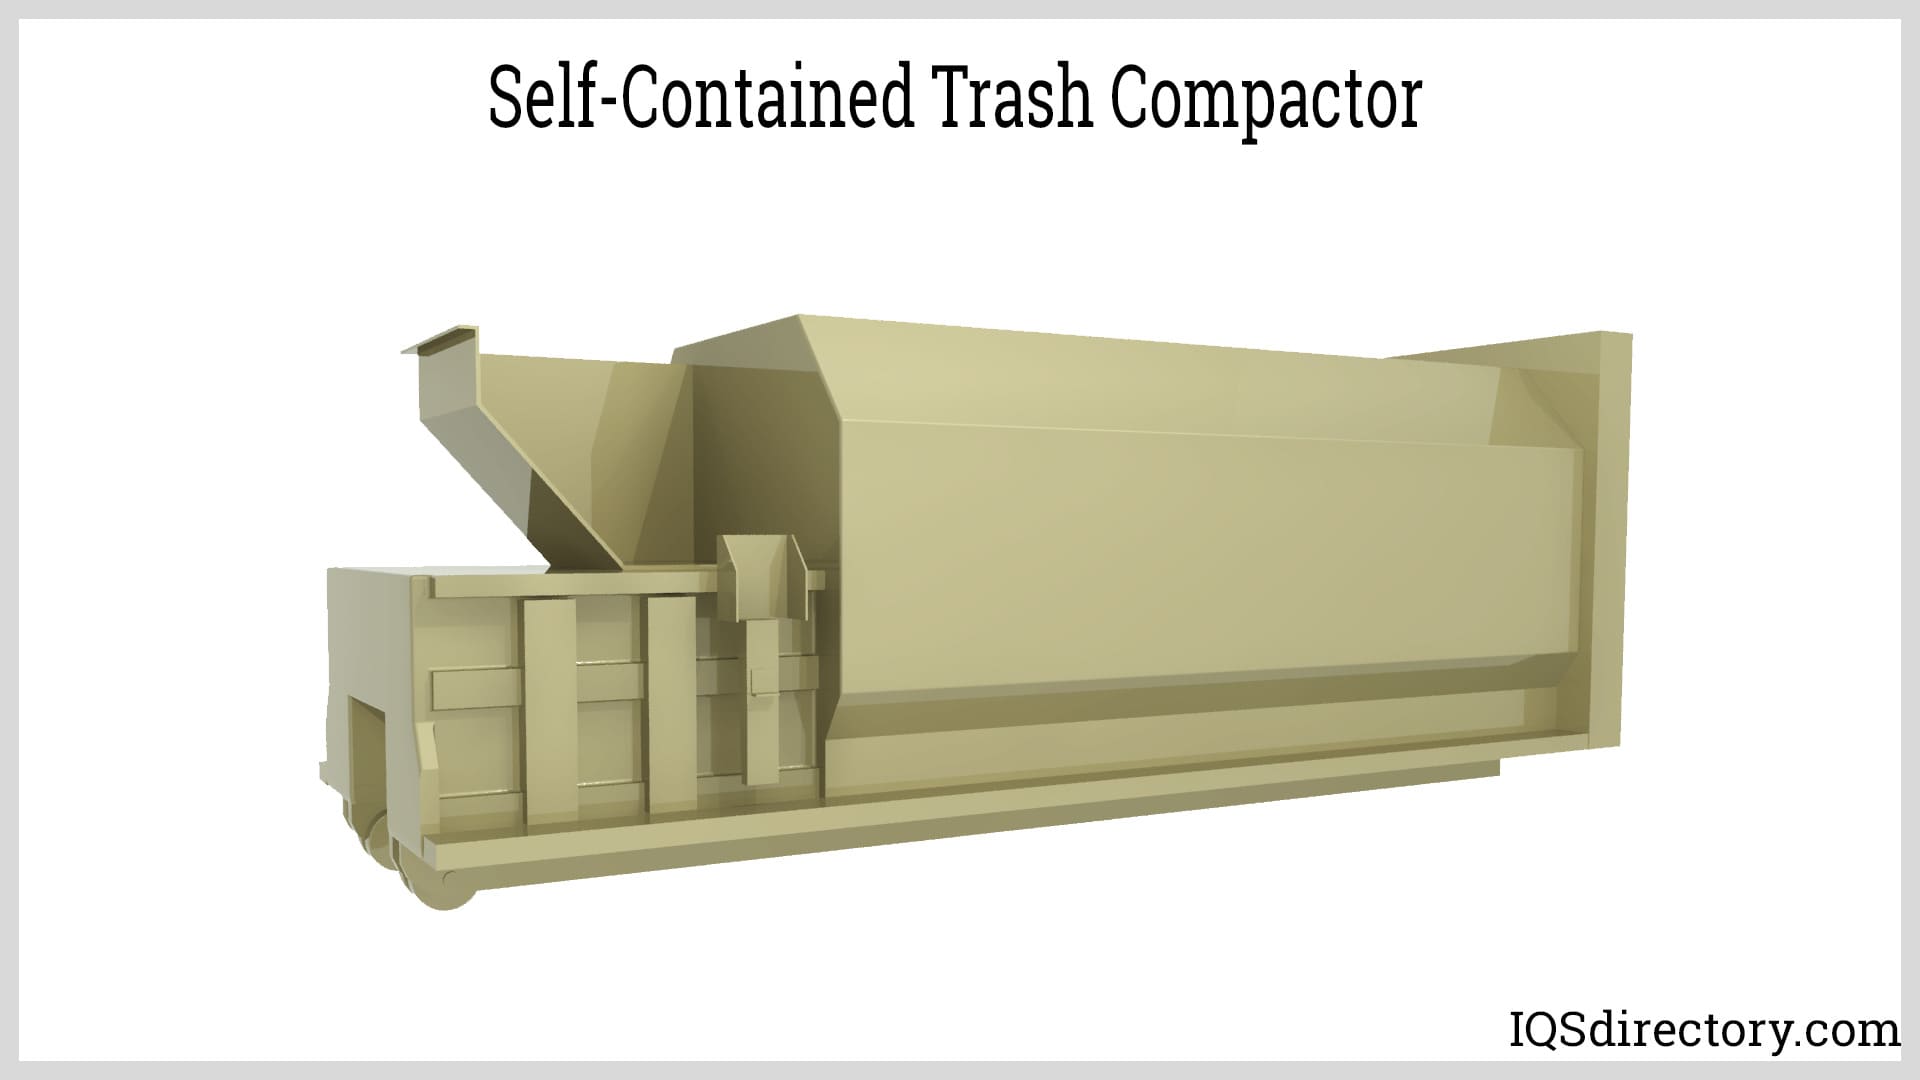 Self-Contained Trash Compactor